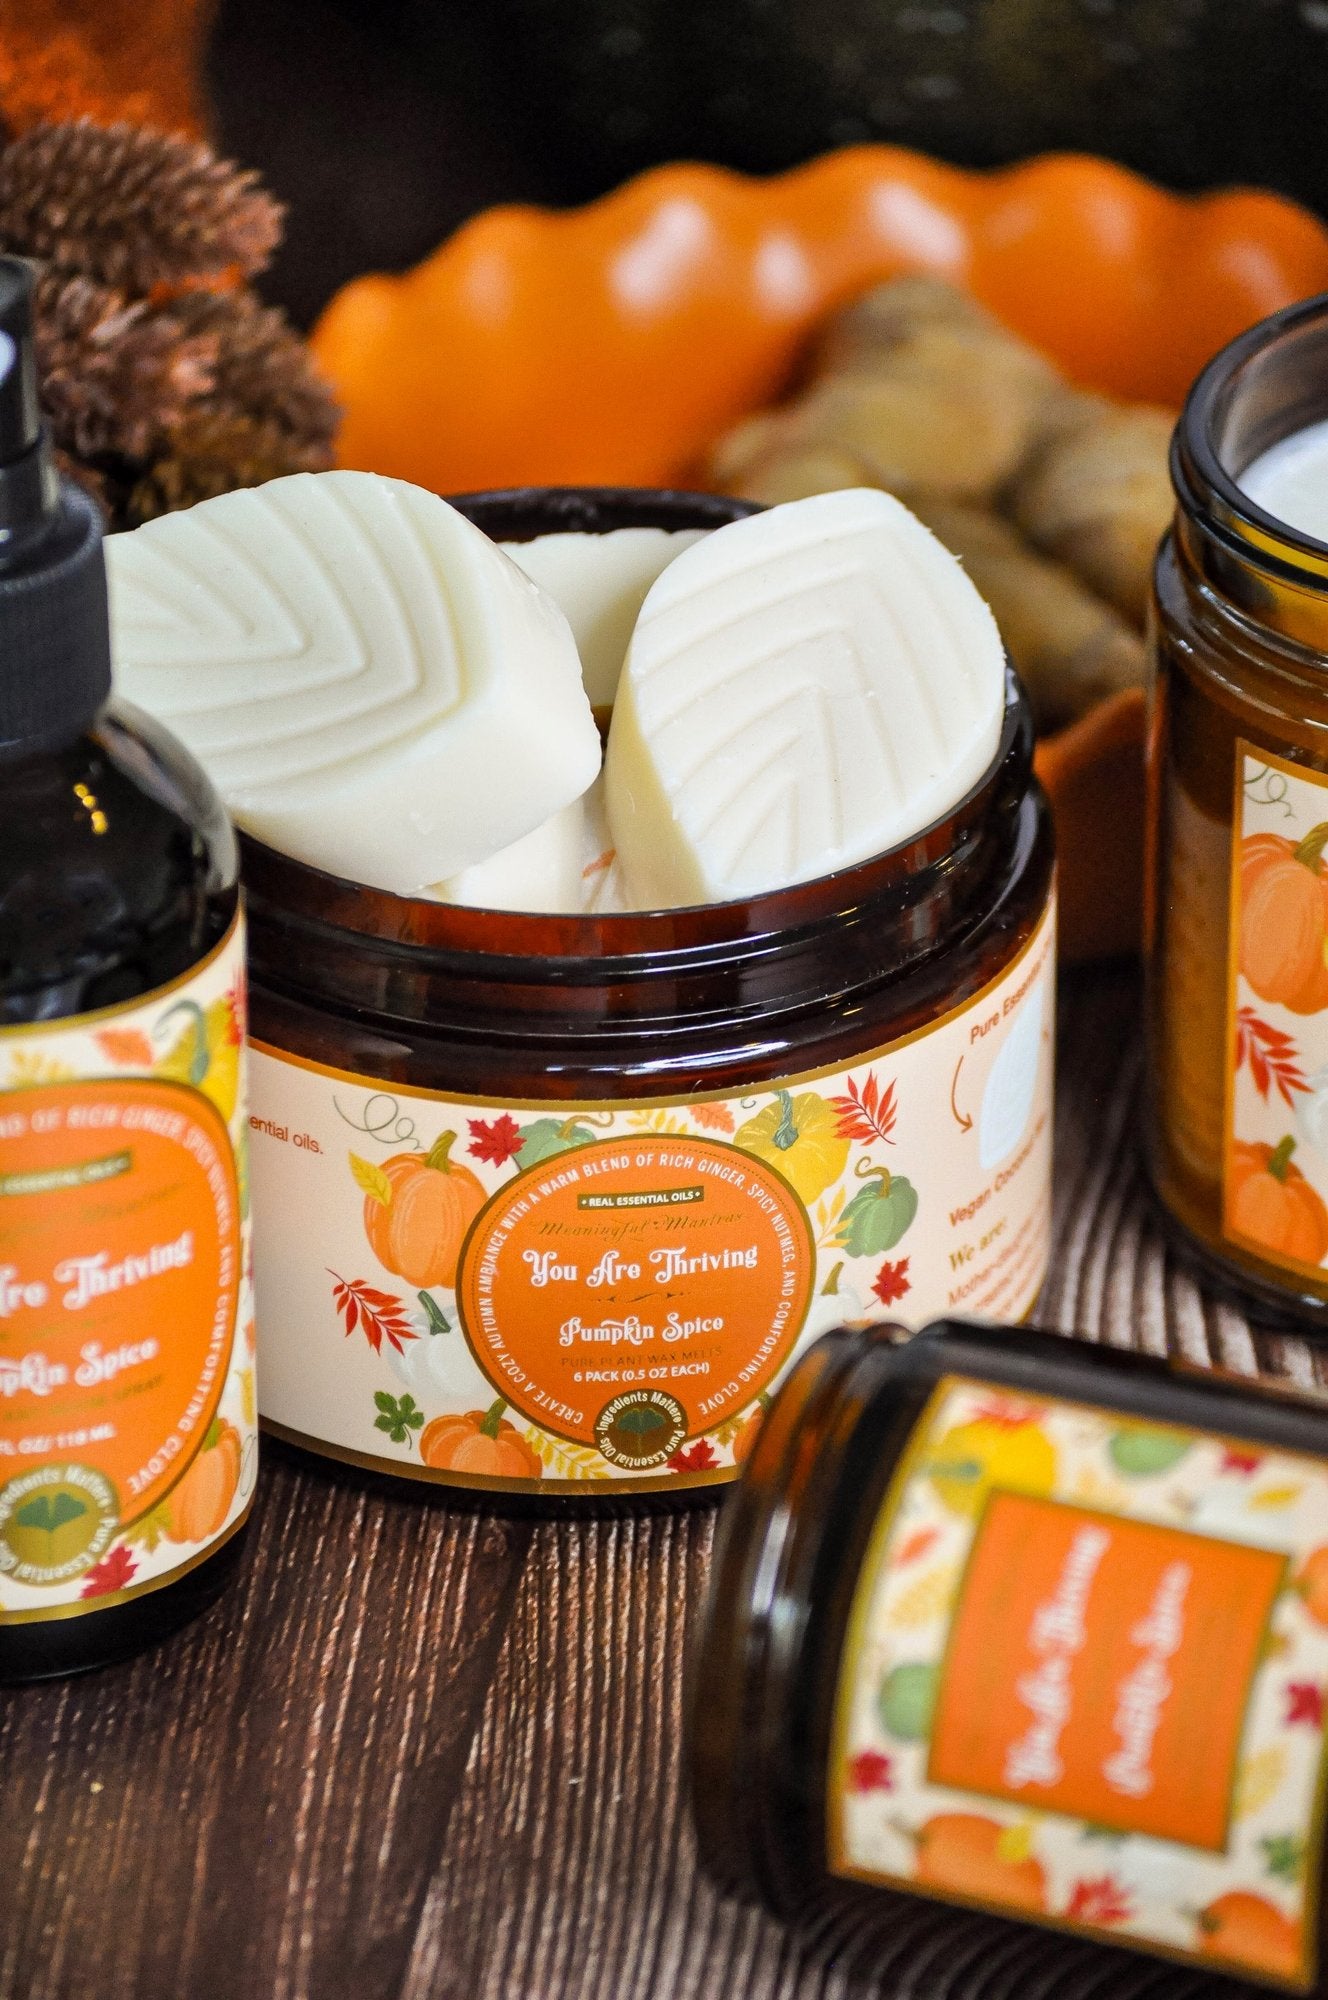 You Are Thriving Pumpkin Spice Wax Melts